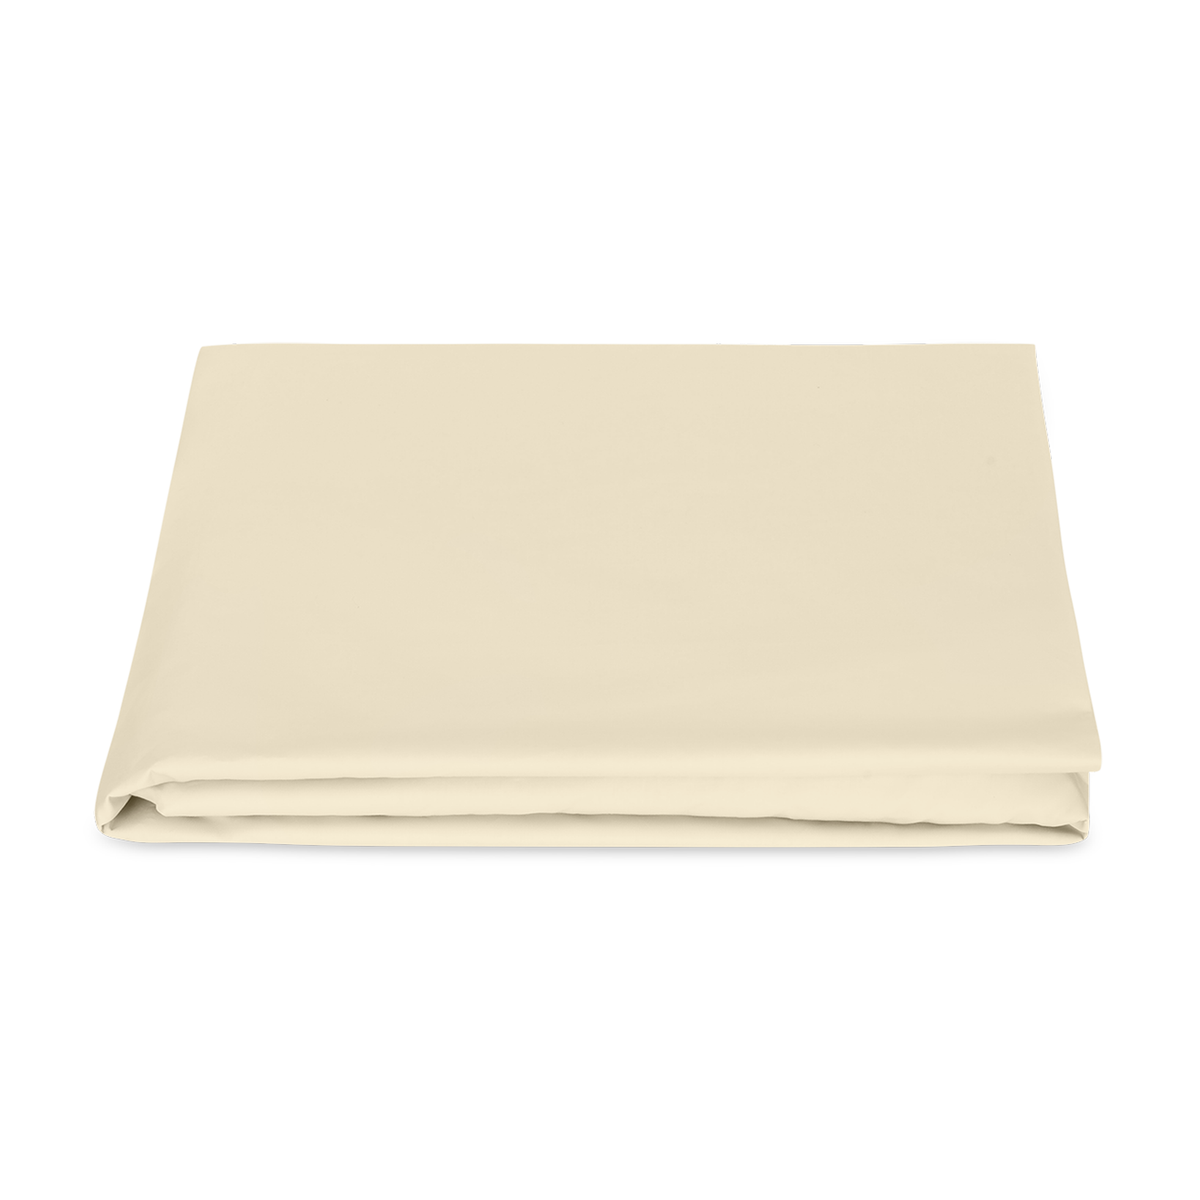 Folded Fitted Sheet of Matouk Milano Hemstitch Bedding in Color Dune